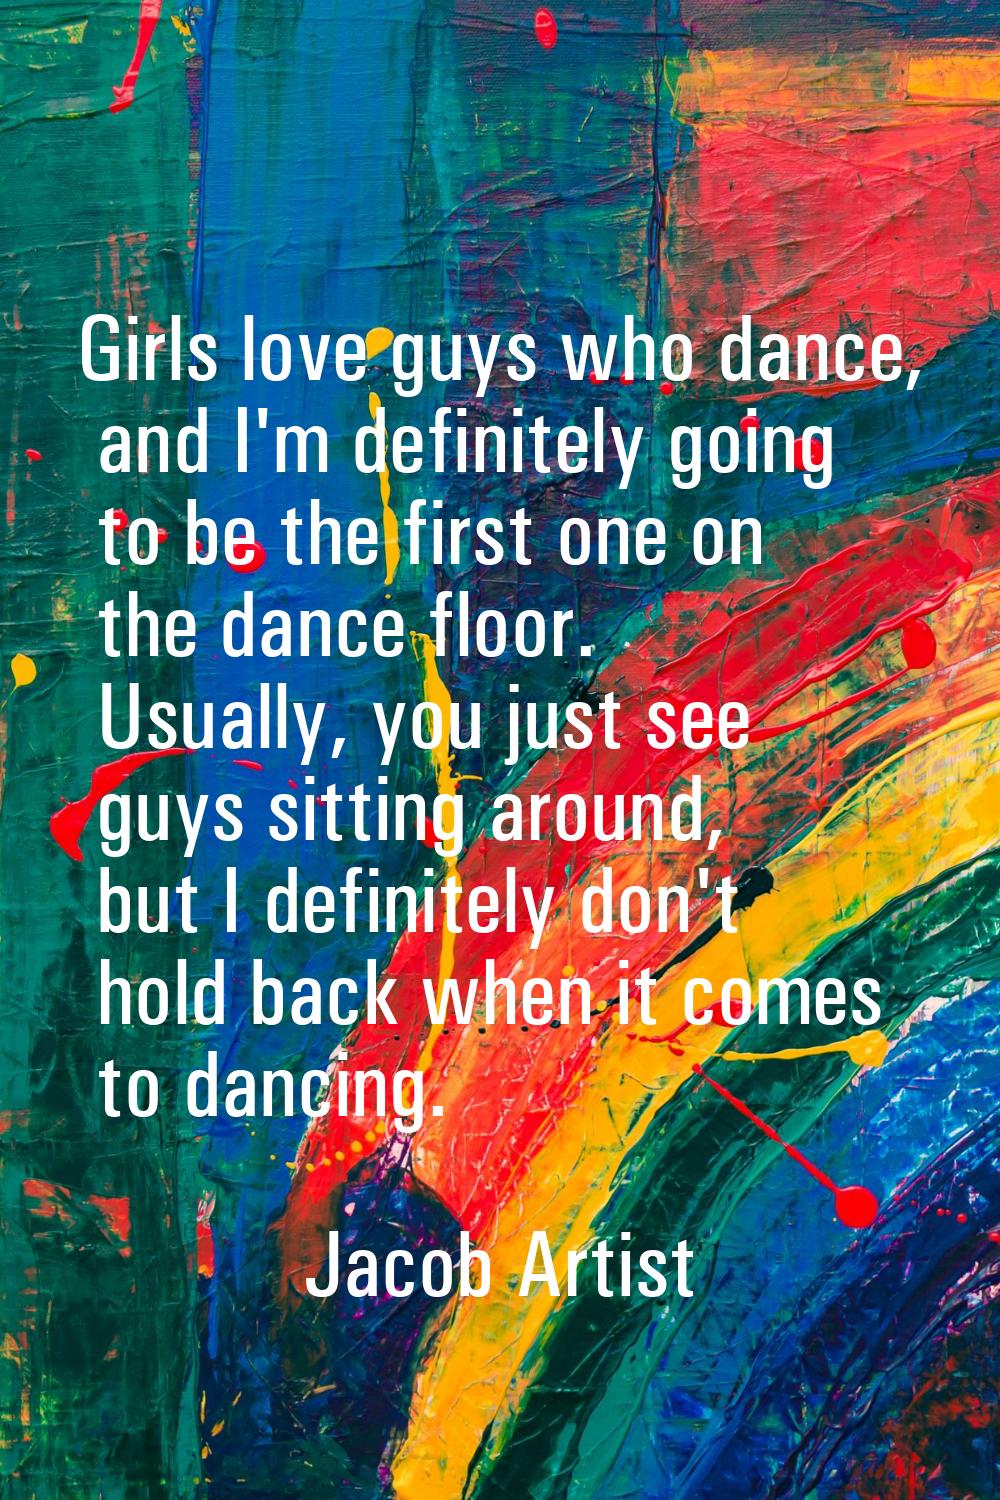 Girls love guys who dance, and I'm definitely going to be the first one on the dance floor. Usually